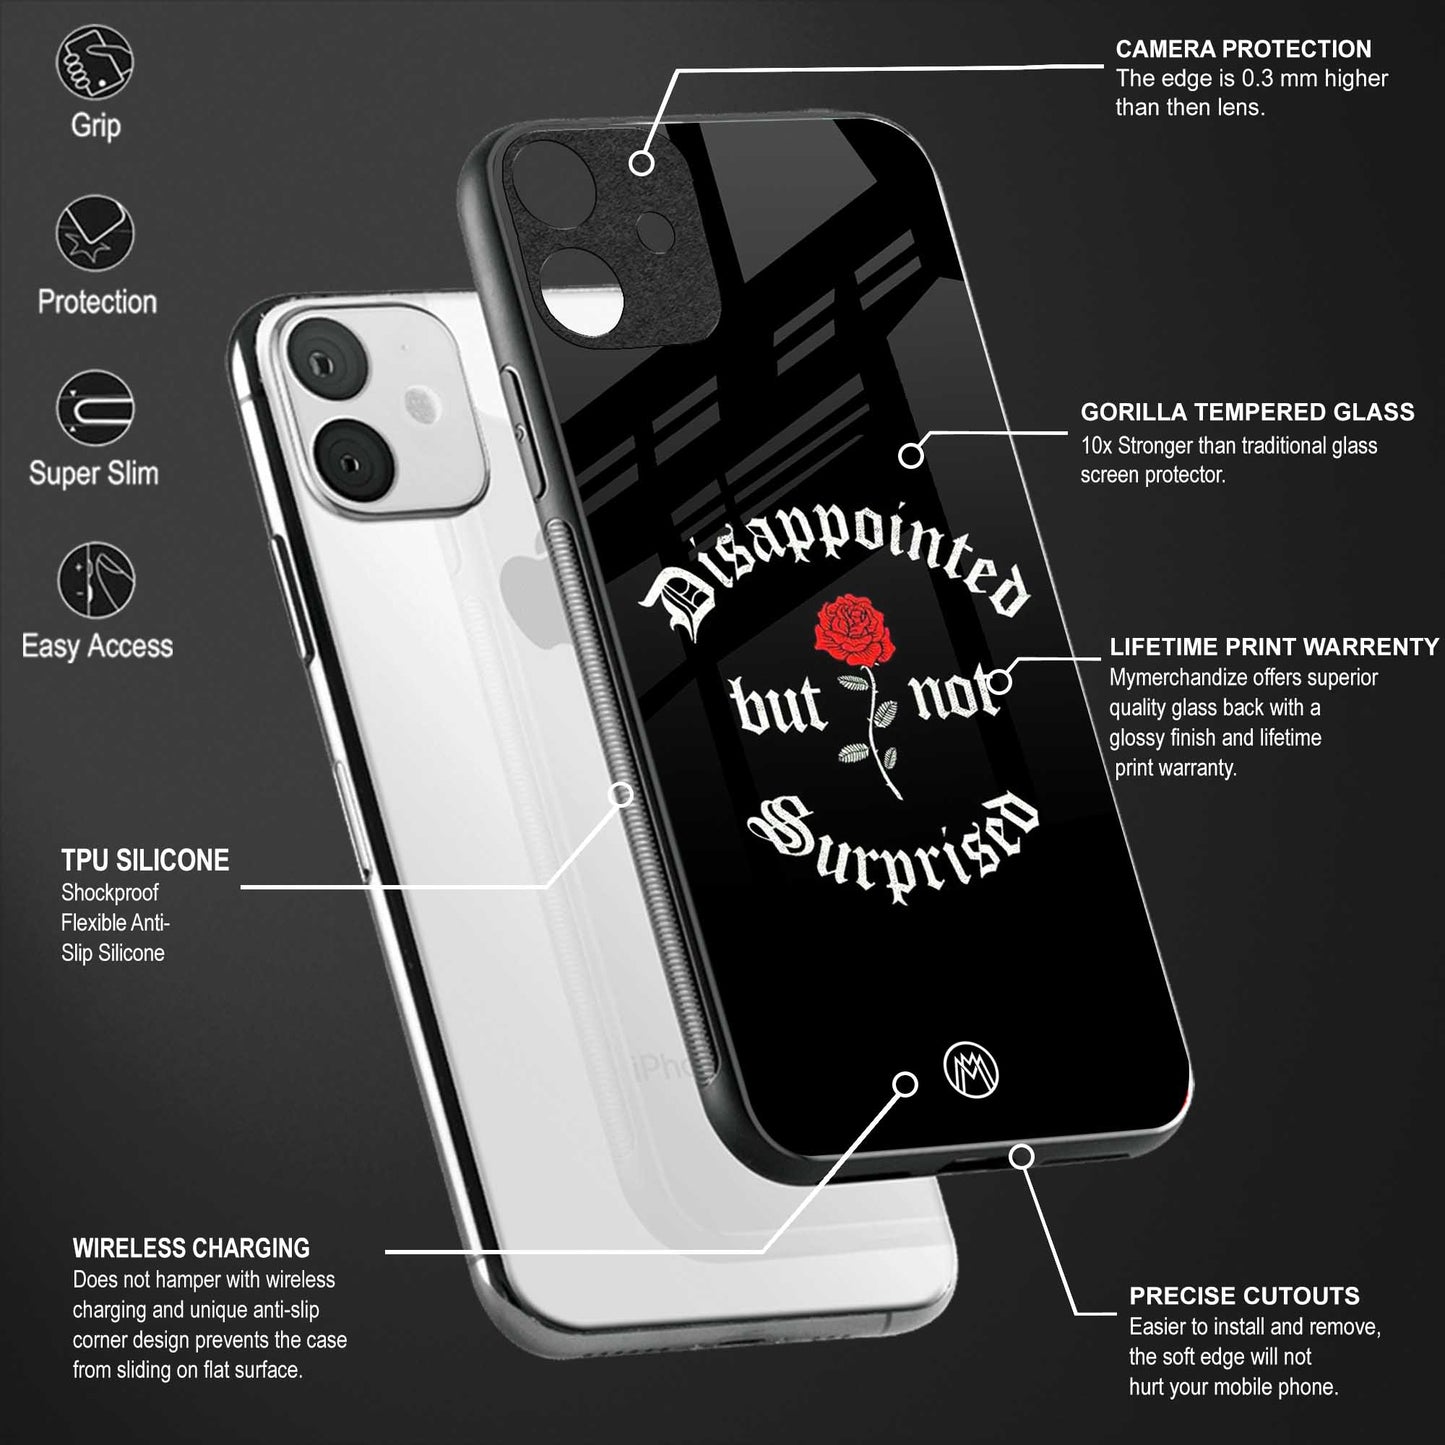 disappointed but not surprised back phone cover | glass case for samsung galaxy a53 5g